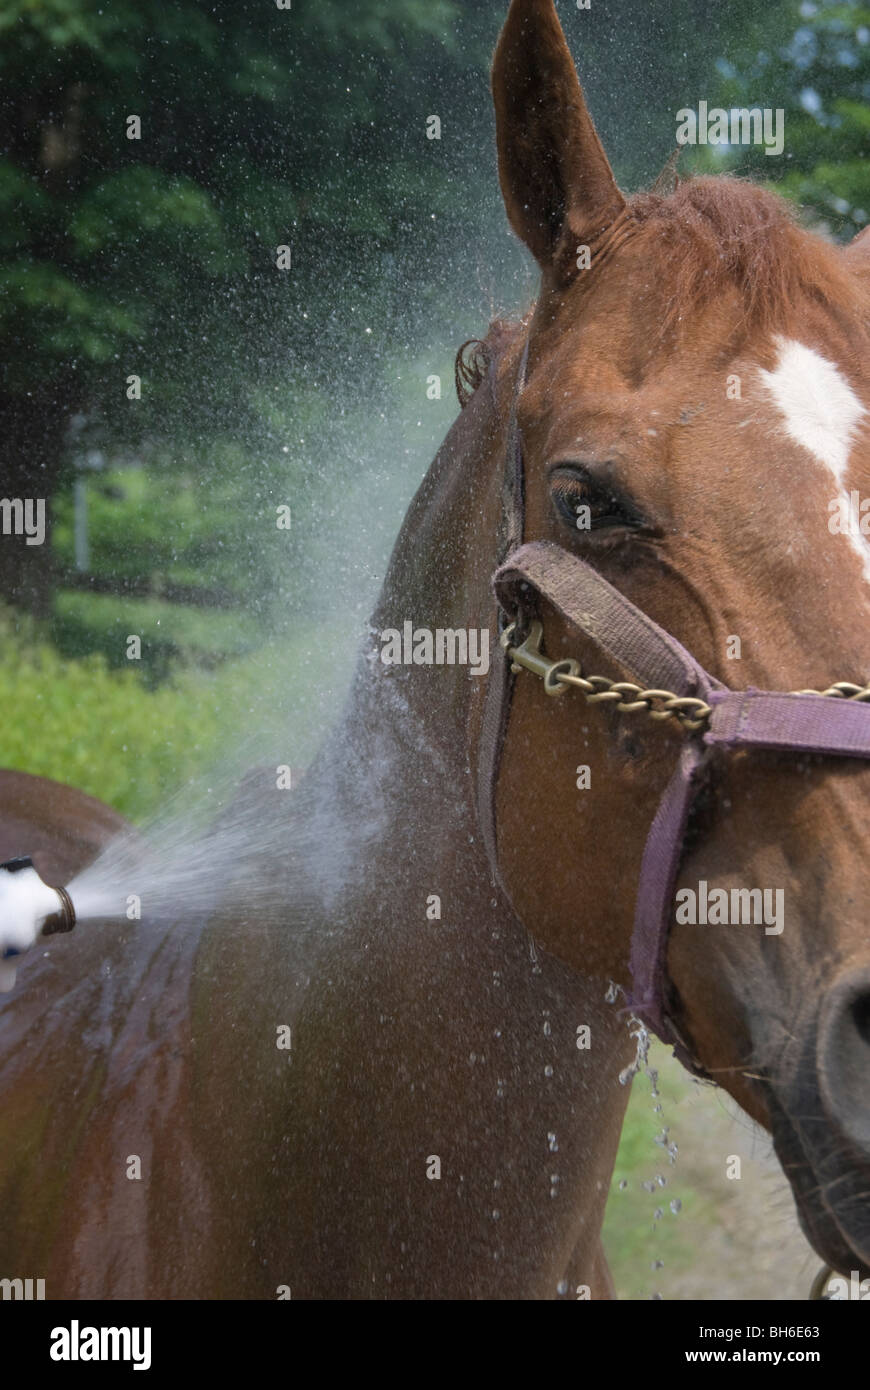 Picutre of horse being sprayed down with a water hose before being scrubbed. Stock Photo